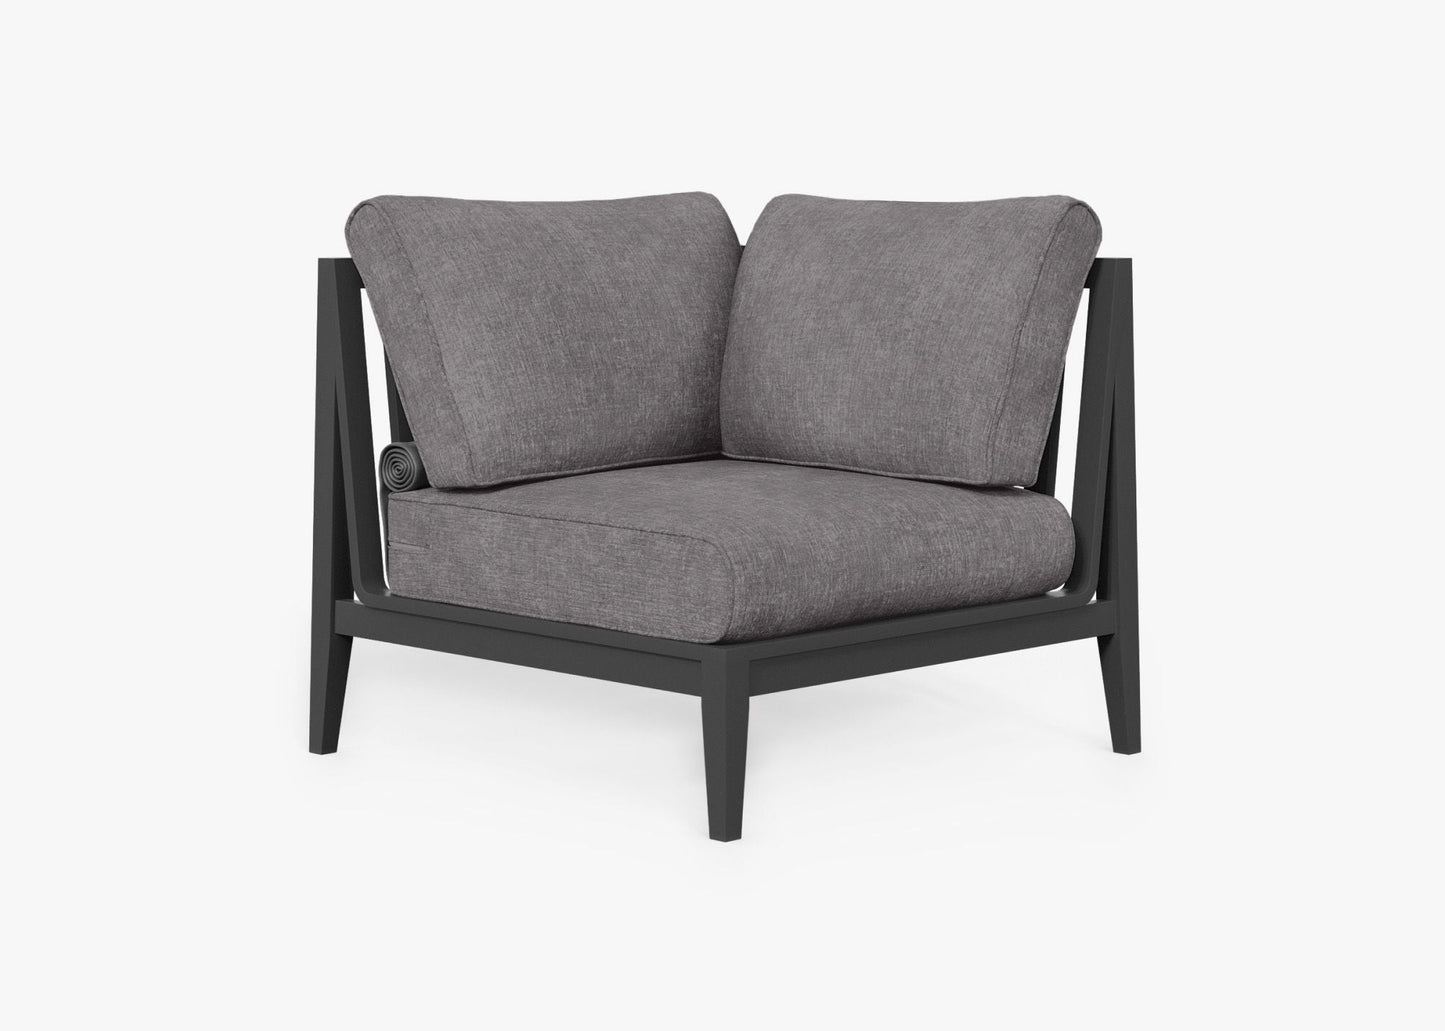 Live Outer 35" Charcoal Aluminum Left Sectional Chair With Dark Pebble Gray Cushion